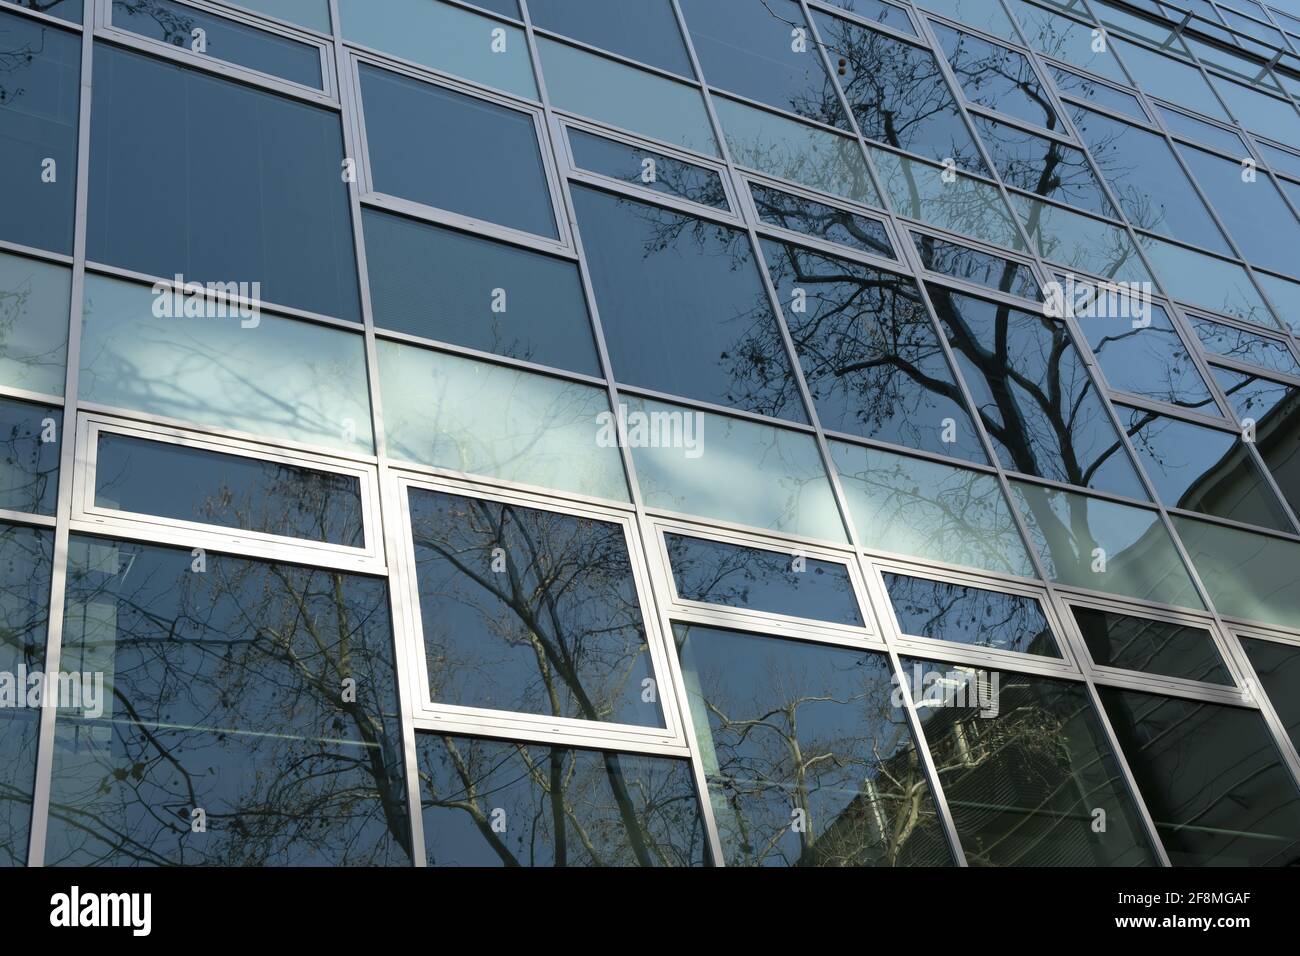 Exterior Windows Of A Modern Commercial Office Building. low angle view of a glass modern facade with reflections Stock Photo